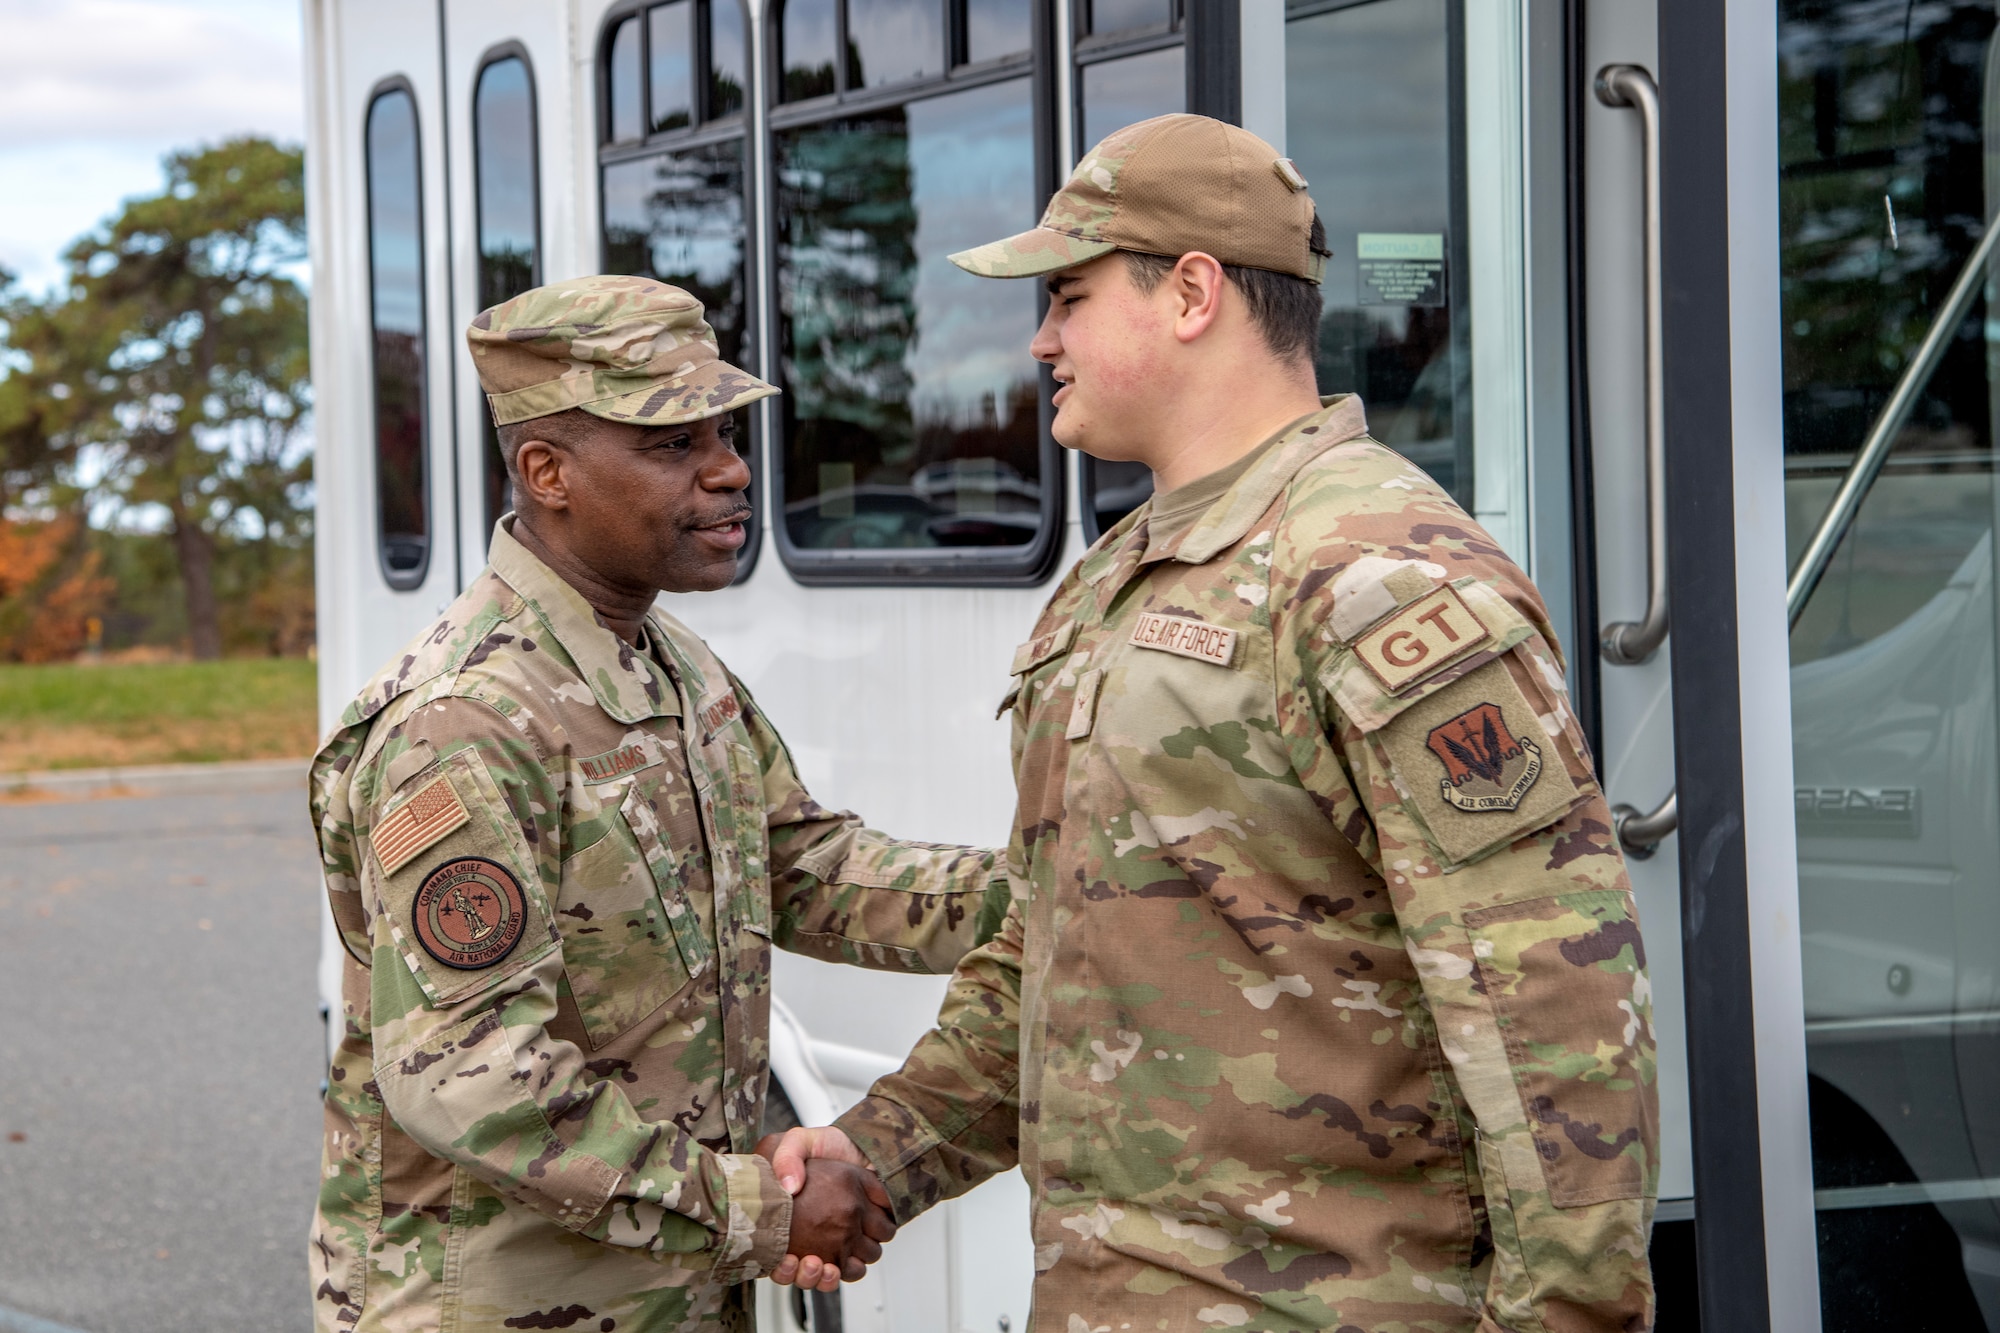 A photo of Chief Master Sgt. Maurice L. Williams shaking the hand of Airman Gavin Mingin.